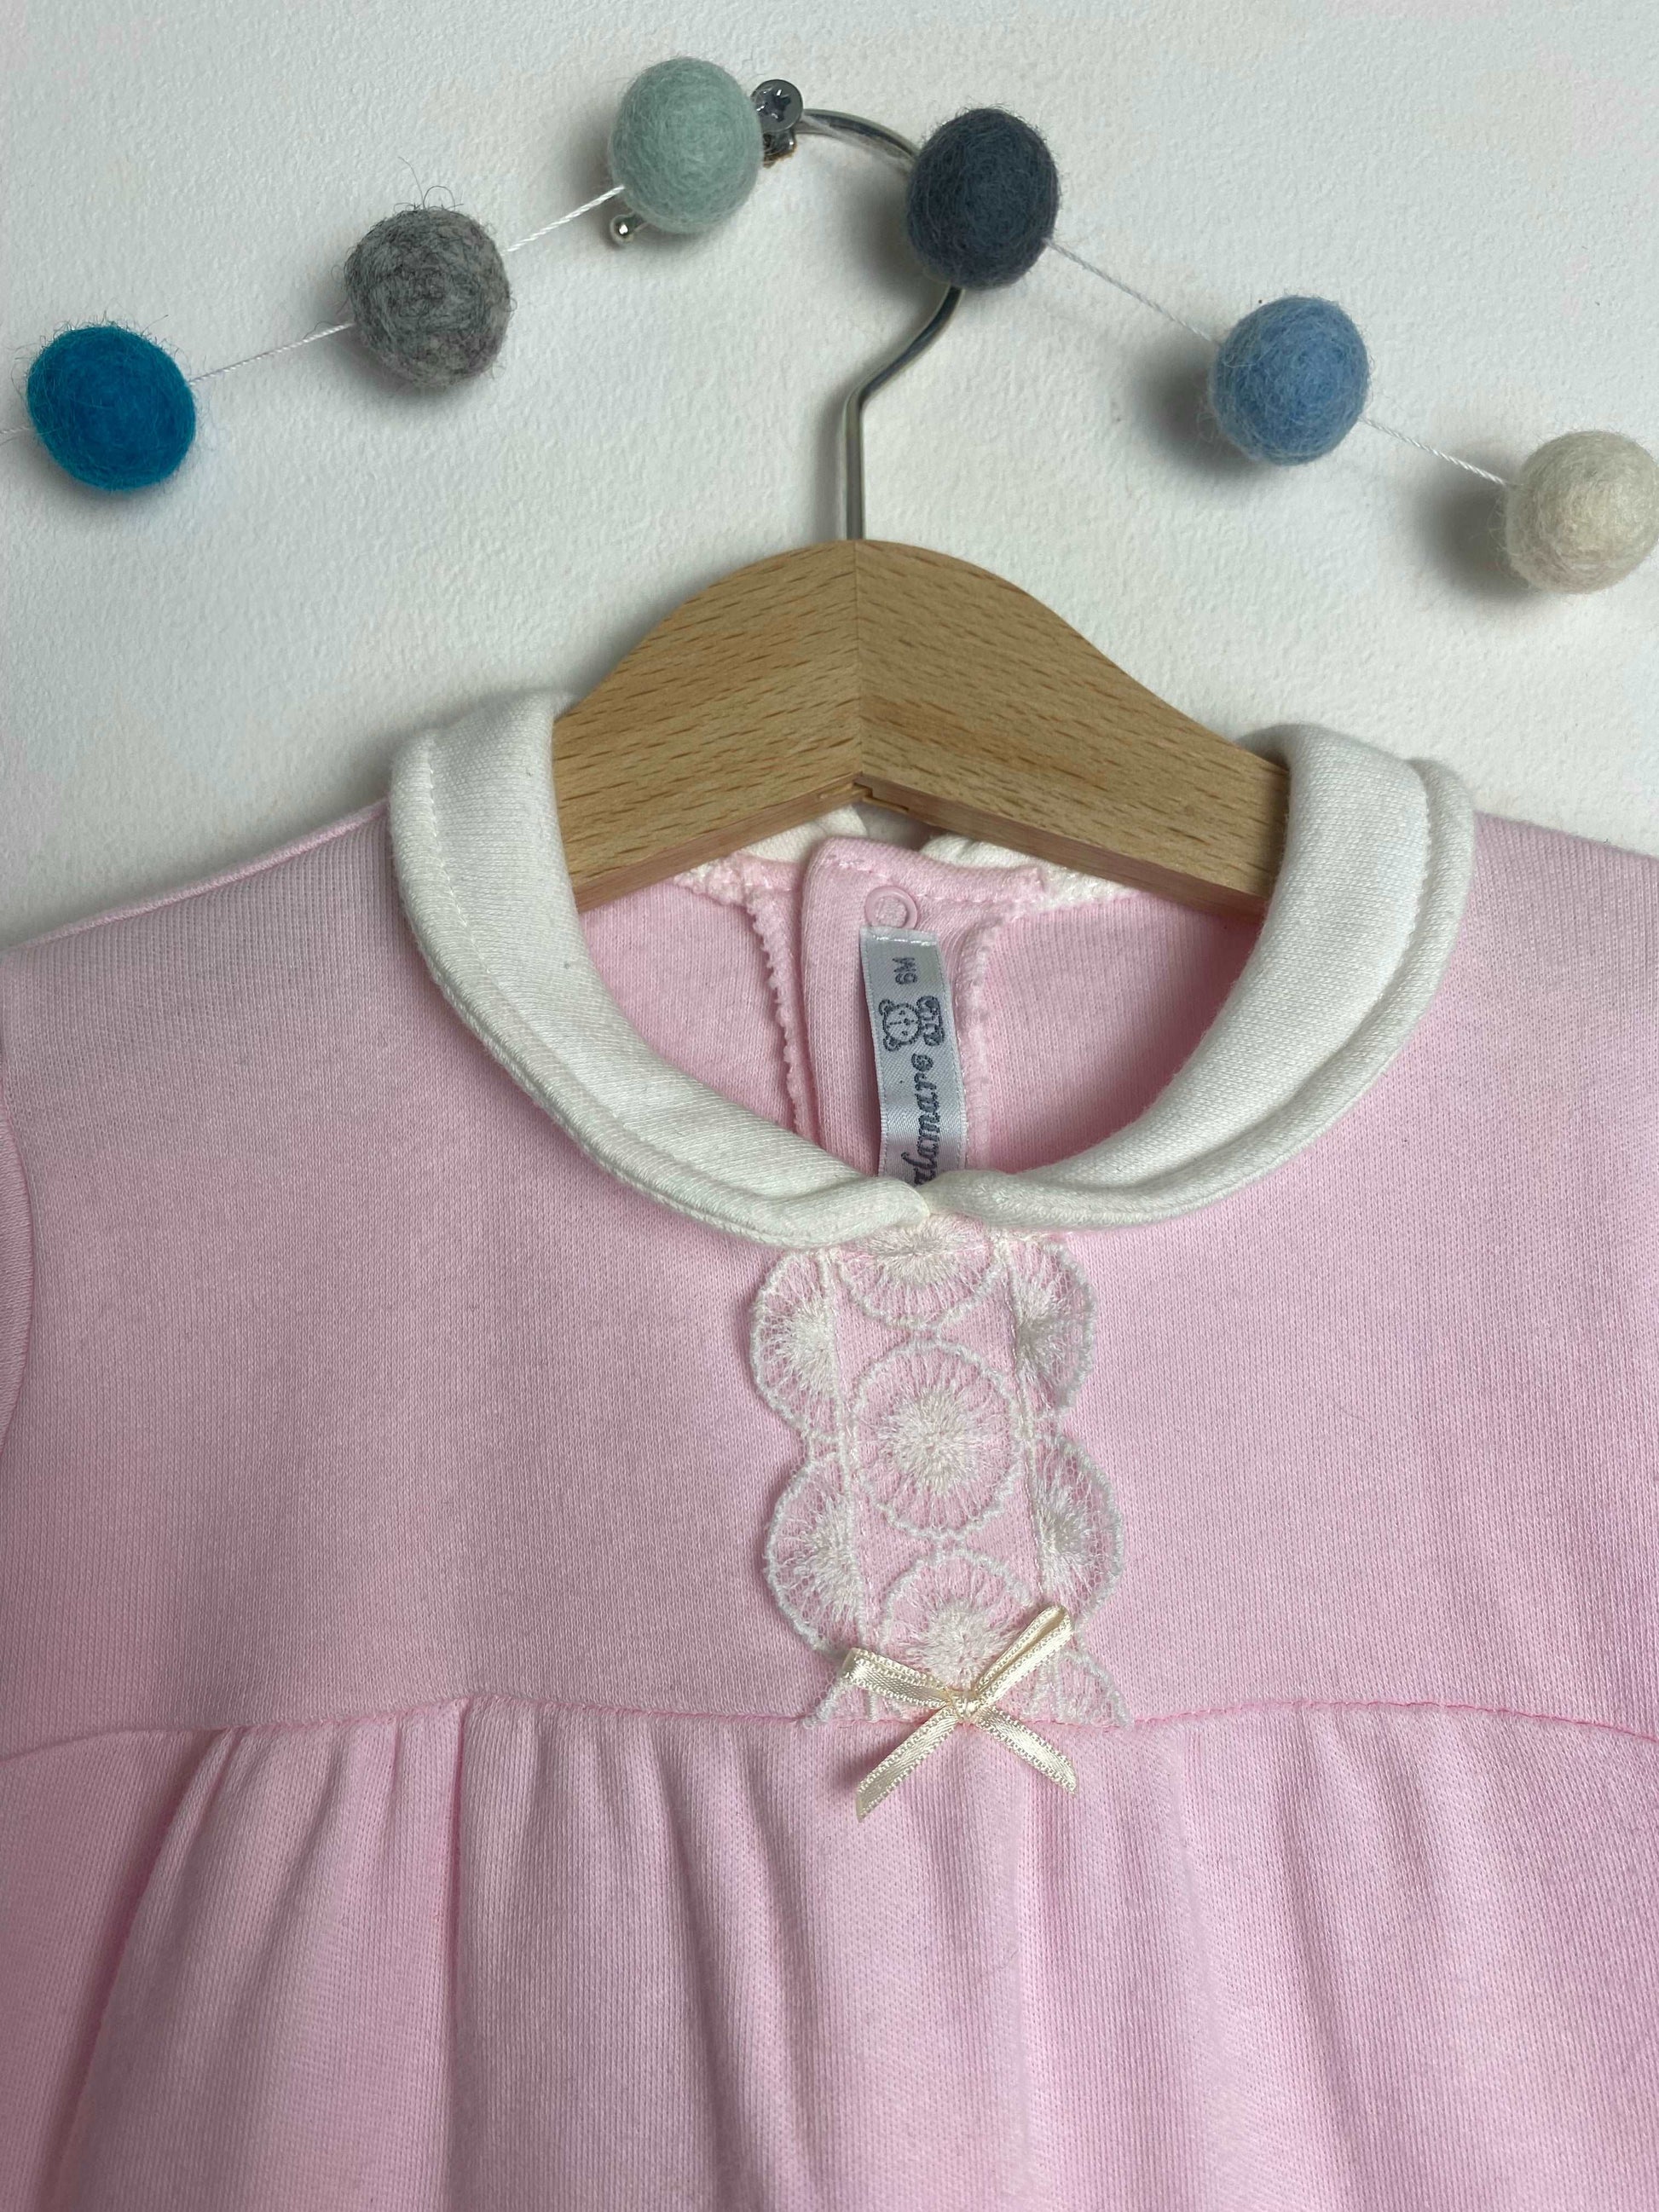 Calamaro 6 Months-Sleepsuits-Second Snuggle Preloved